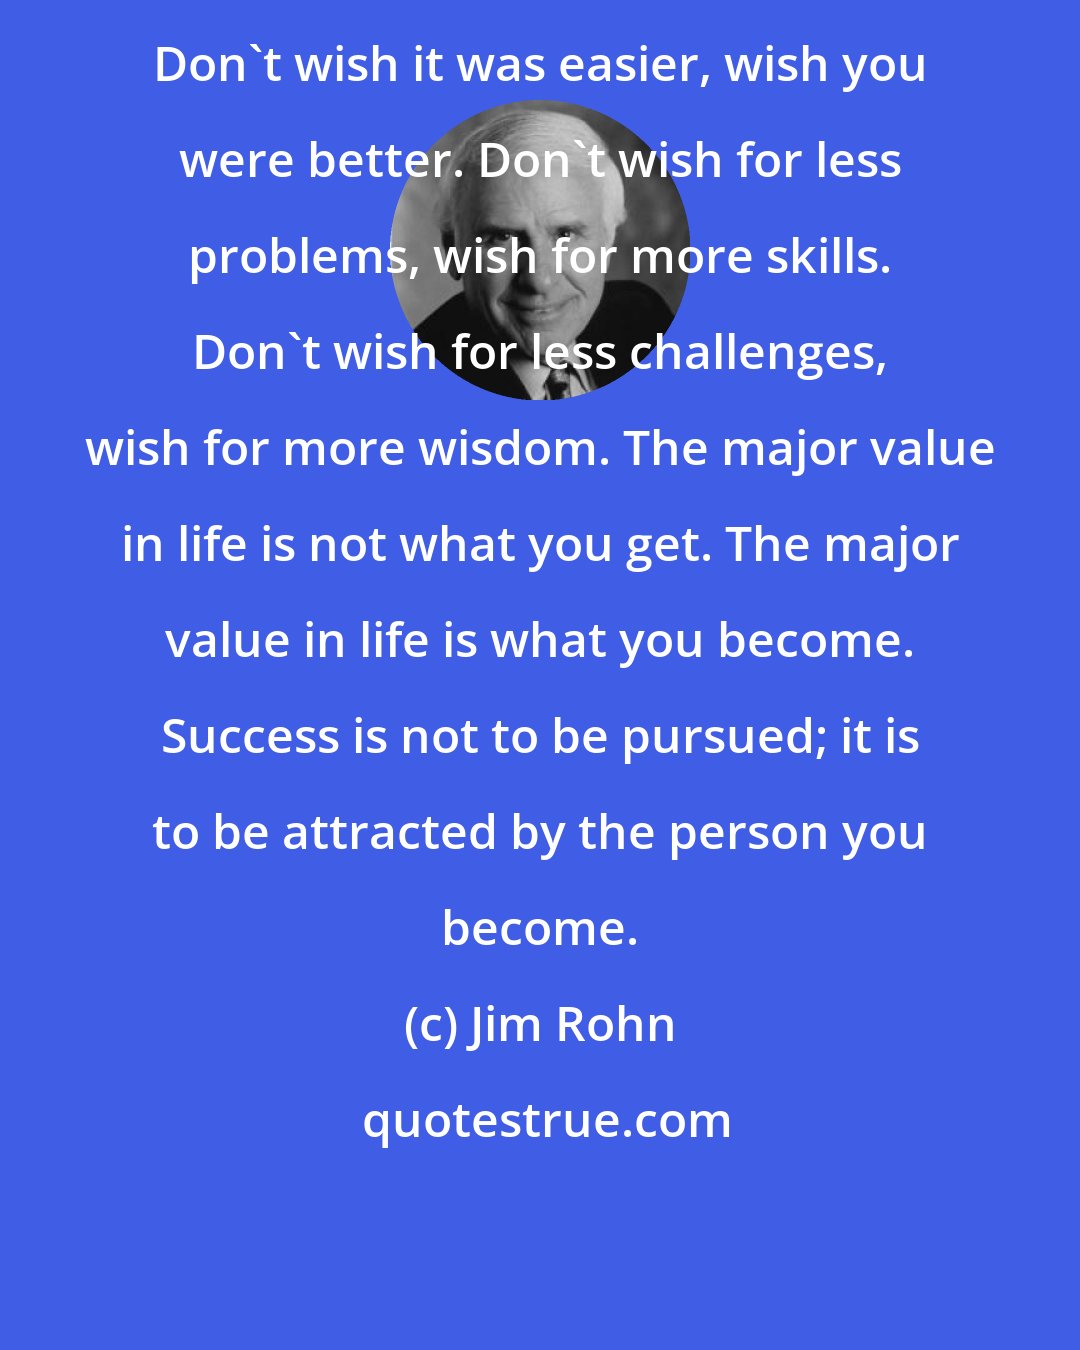 Jim Rohn: Don't wish it was easier, wish you were better. Don't wish for less problems, wish for more skills. Don't wish for less challenges, wish for more wisdom. The major value in life is not what you get. The major value in life is what you become. Success is not to be pursued; it is to be attracted by the person you become.